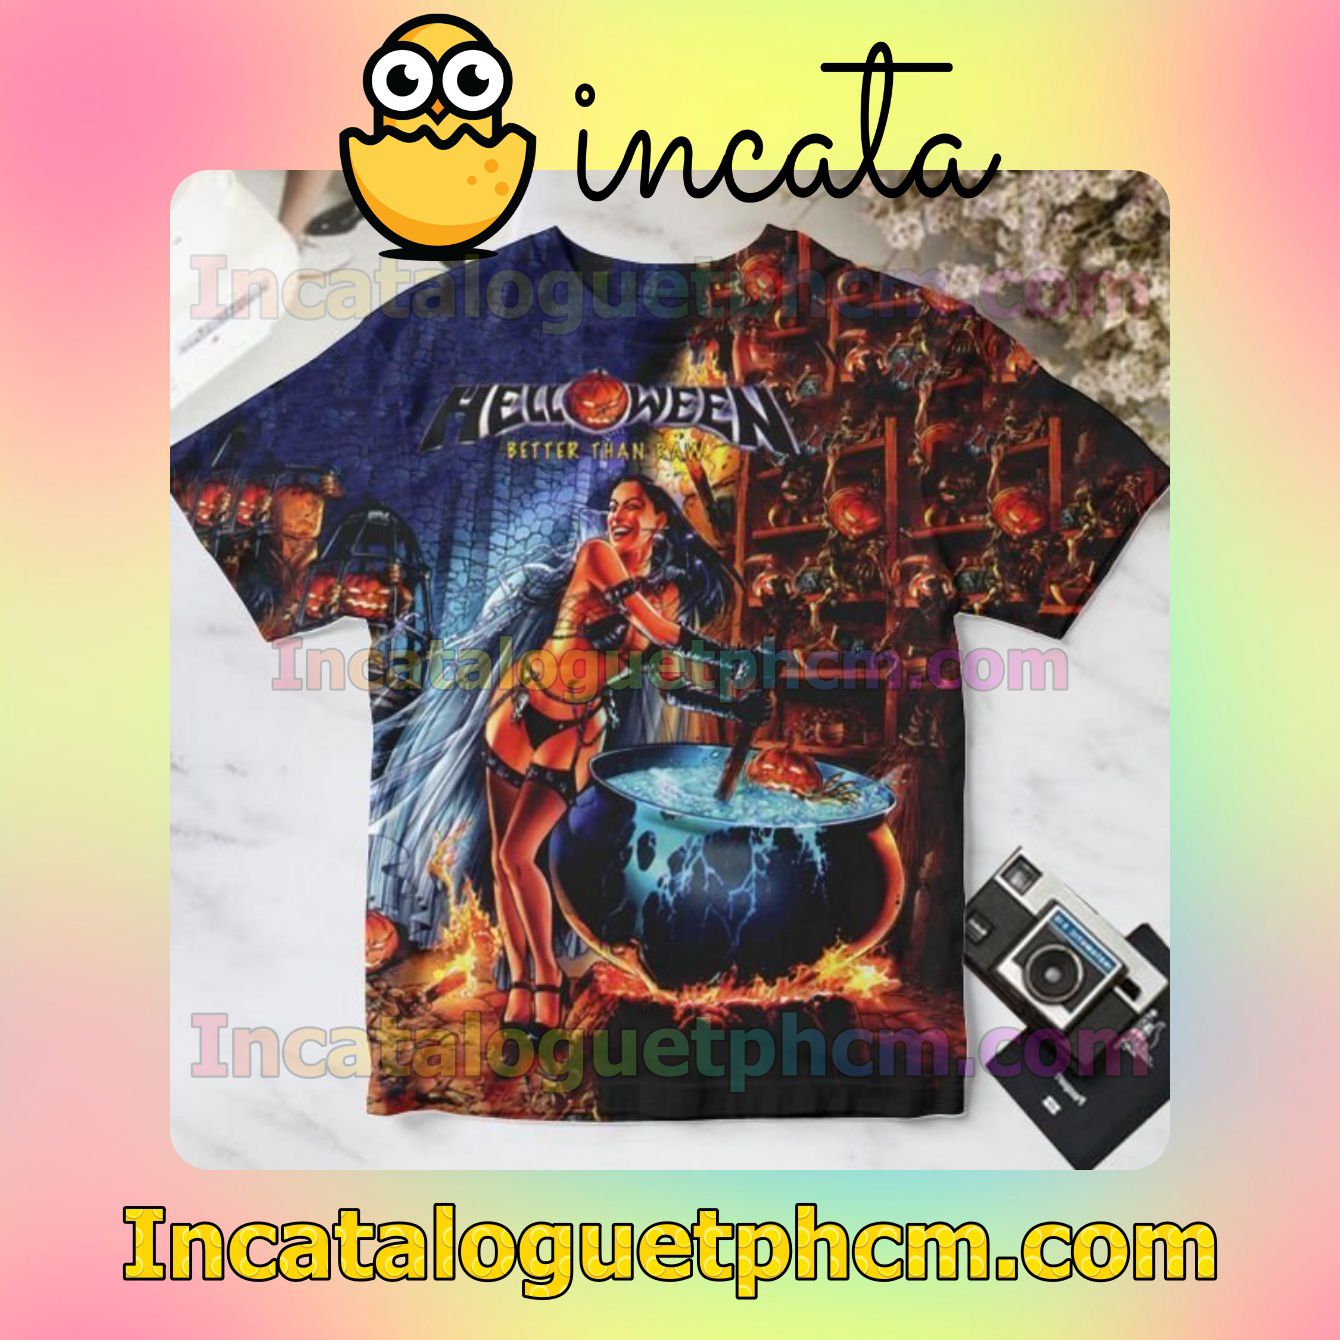 Helloween Better Than Raw Album Cover Personalized Shirt